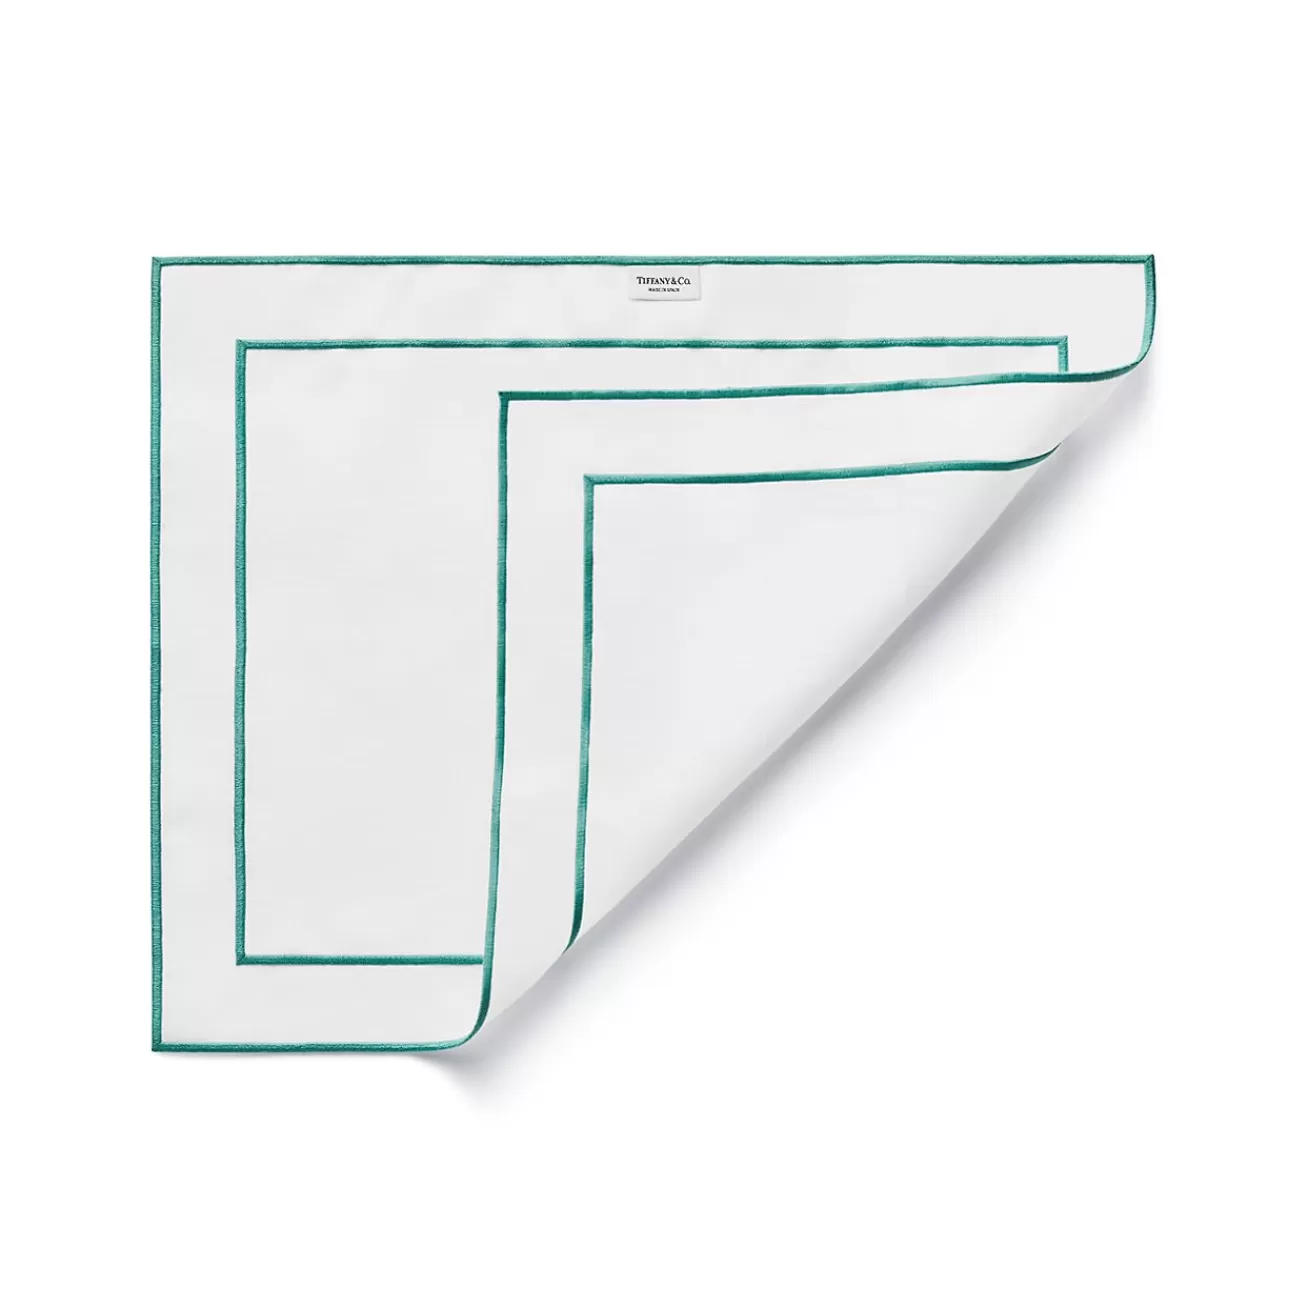 Tiffany & Co. Tiffany Home Essentials Embroidered Placemats in Linen, Set of Four | ^ The Home | Housewarming Gifts